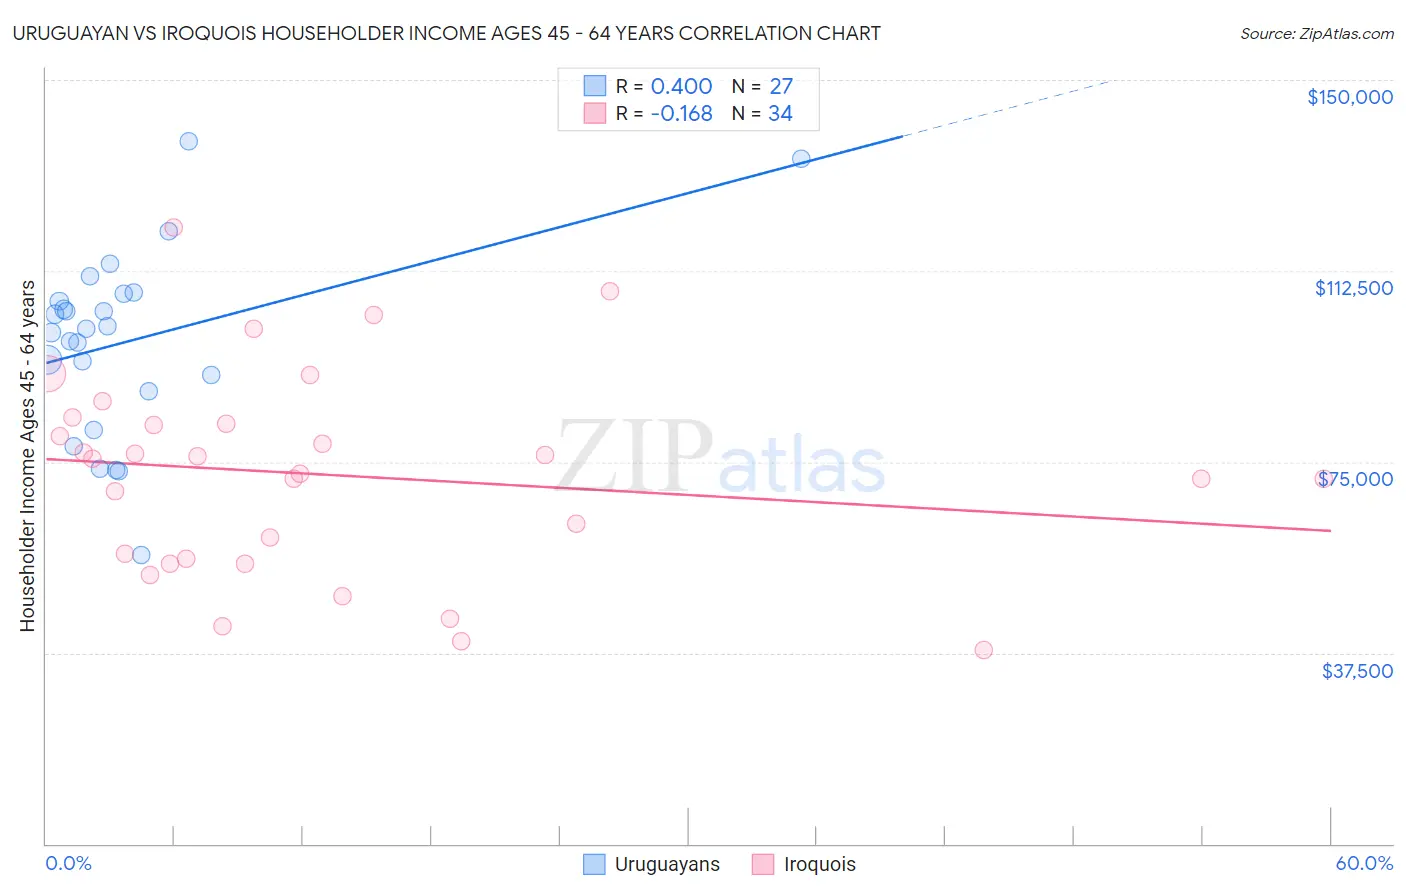 Uruguayan vs Iroquois Householder Income Ages 45 - 64 years